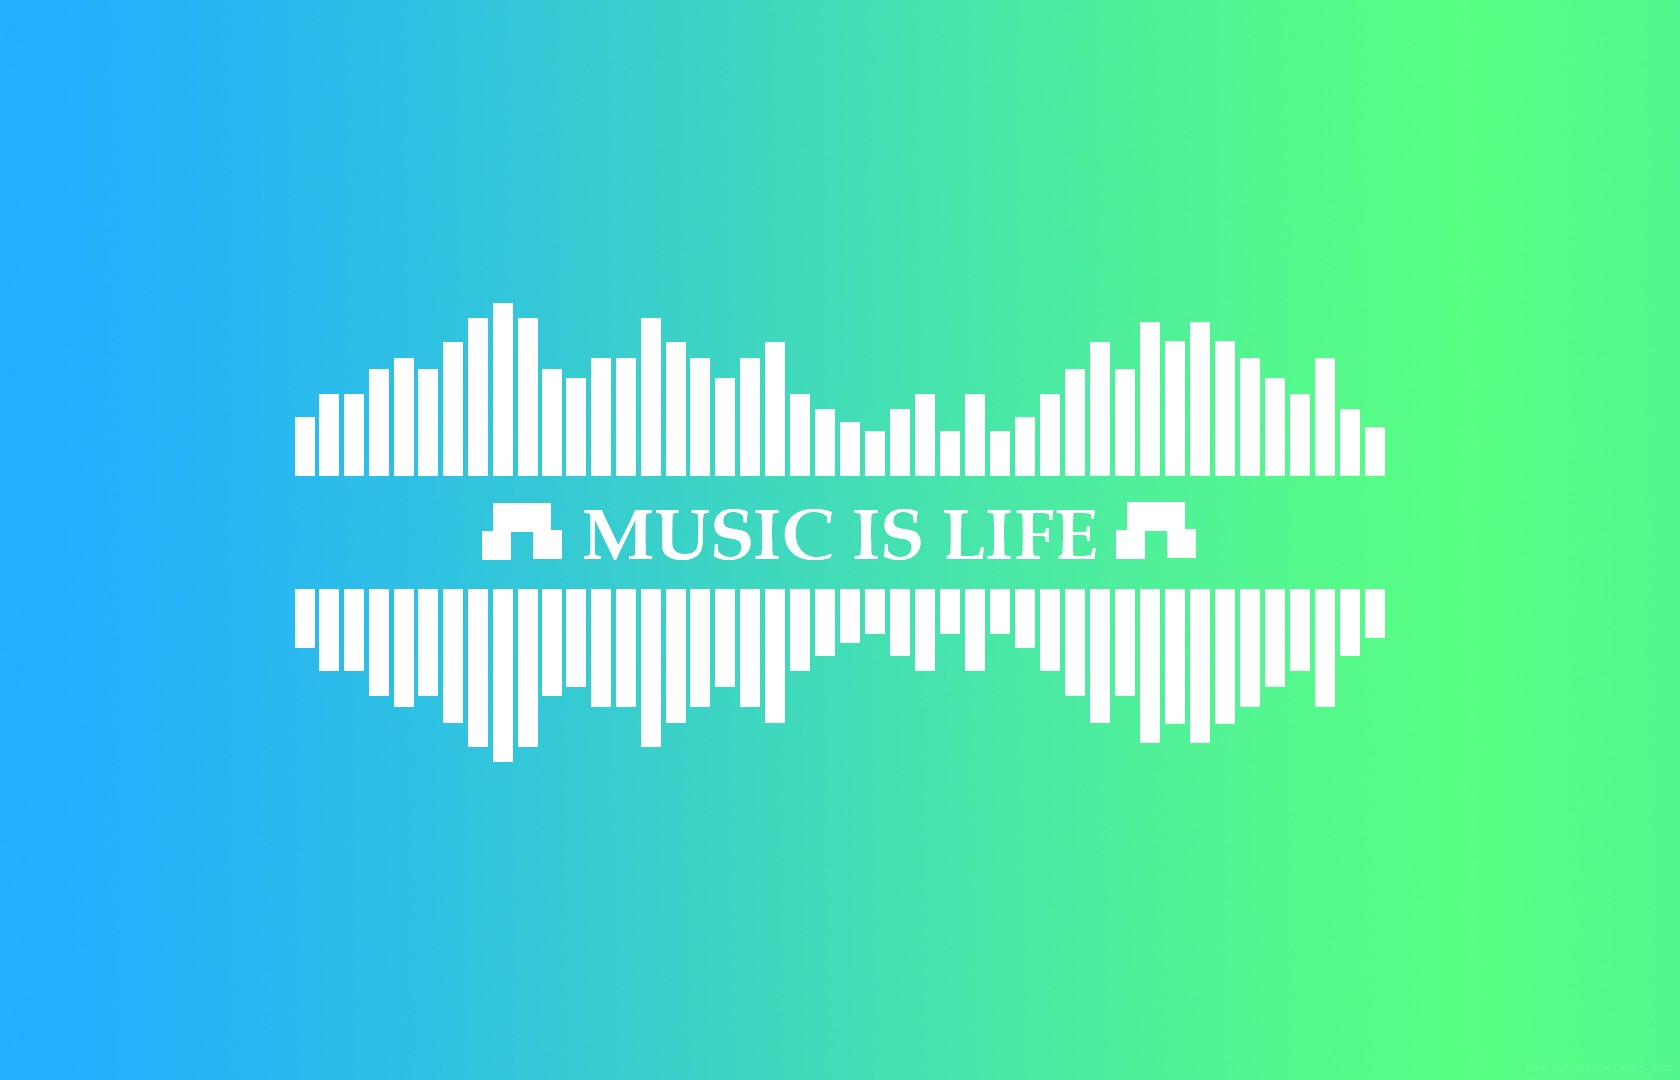 music, Bars, Simple, Colorful, Abstract, Headphones, House Music, Sharp, Music Is Life Wallpaper